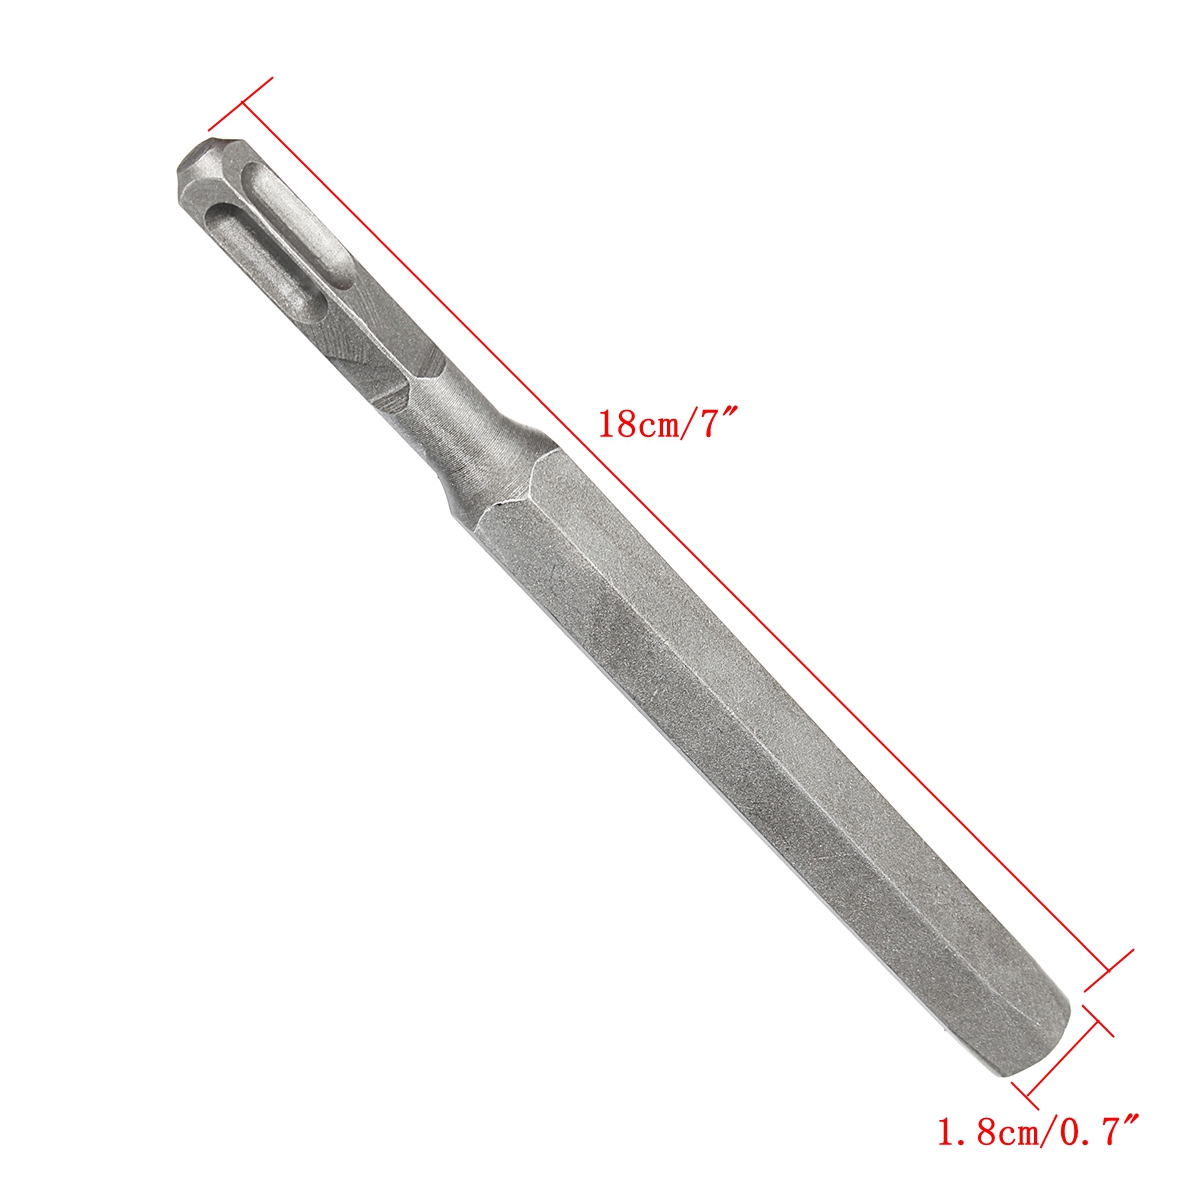 Rotary-Hammer-Electric-Hammer-Demolition-Hammer-Drill-Connecting-Rod-Handle-Accessory-1299228-5